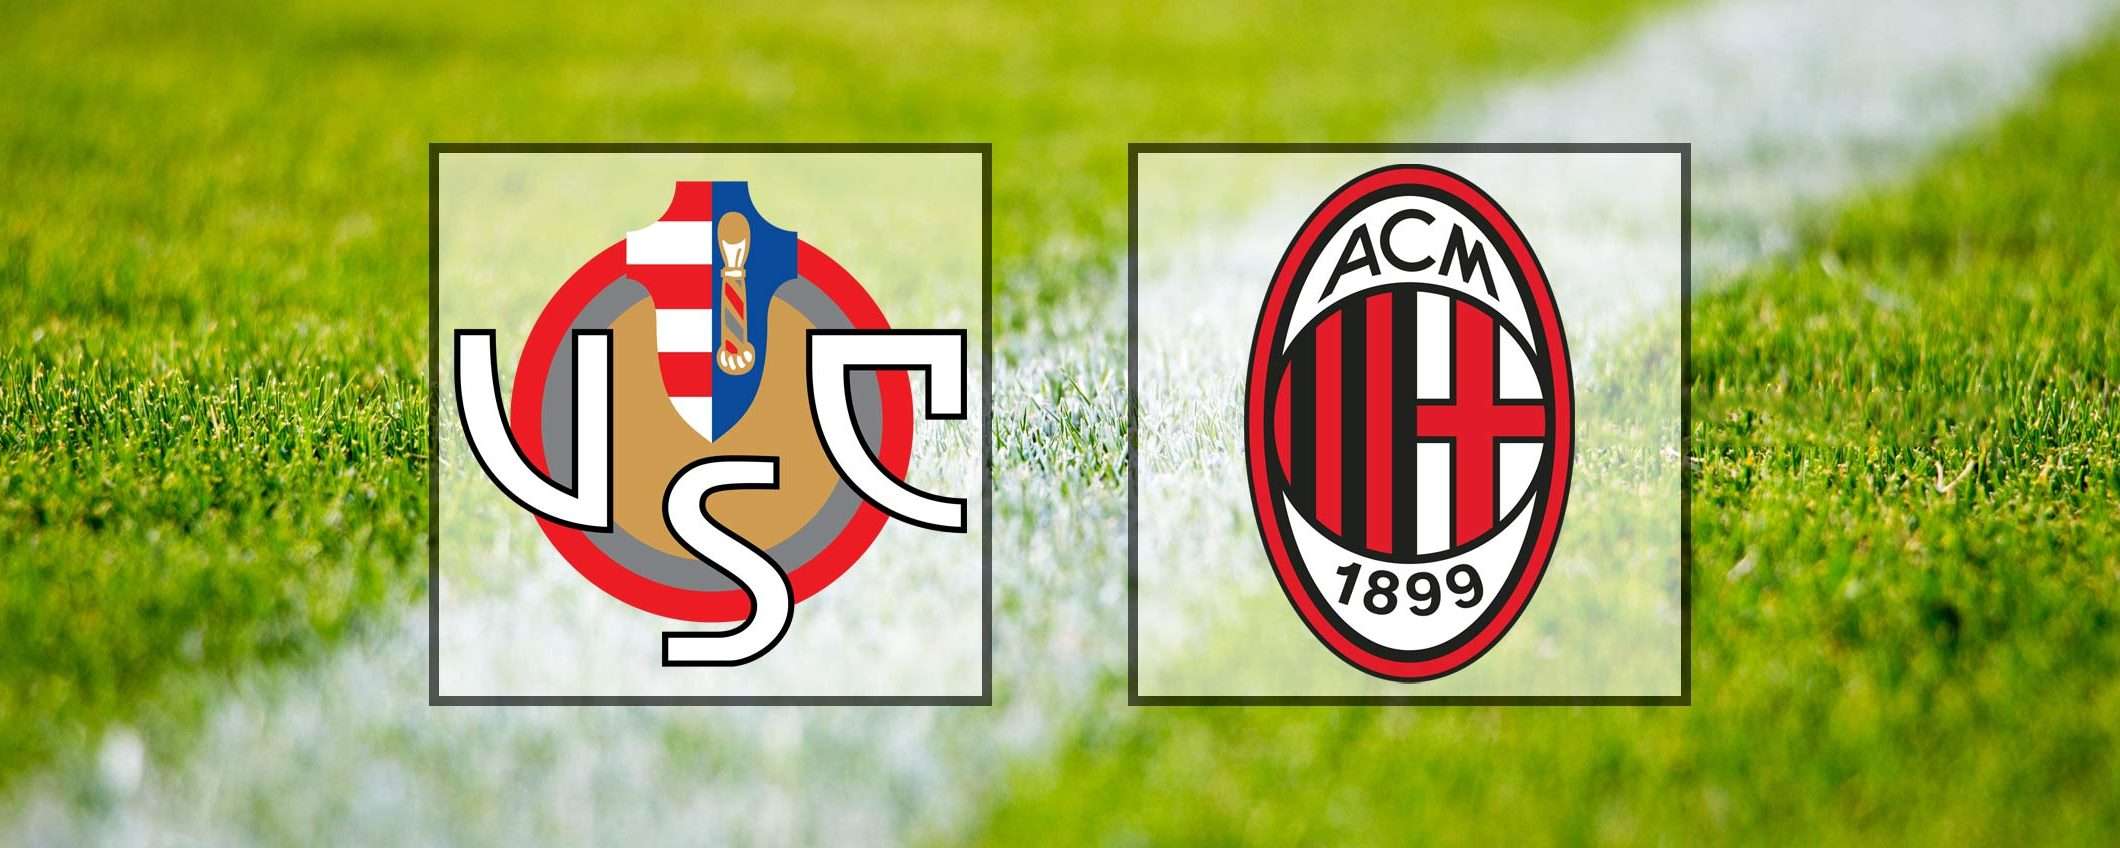 Come vedere Cremonese-Milan in streaming (Serie A)